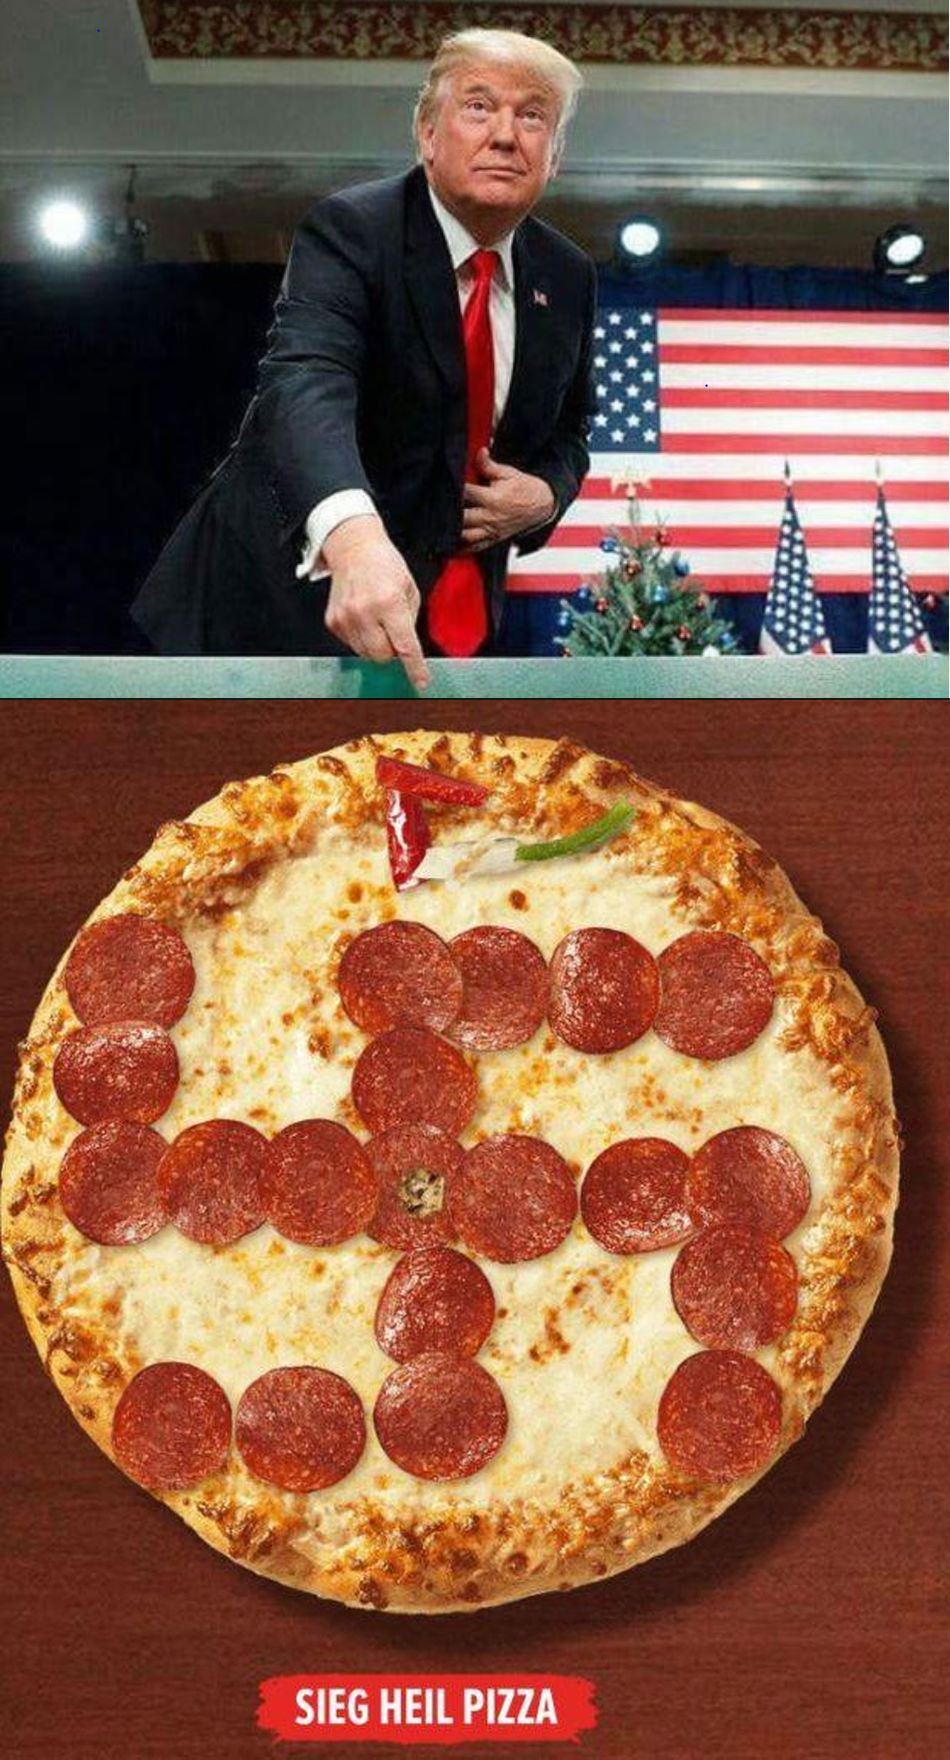 Baked at Halal PizzaGate